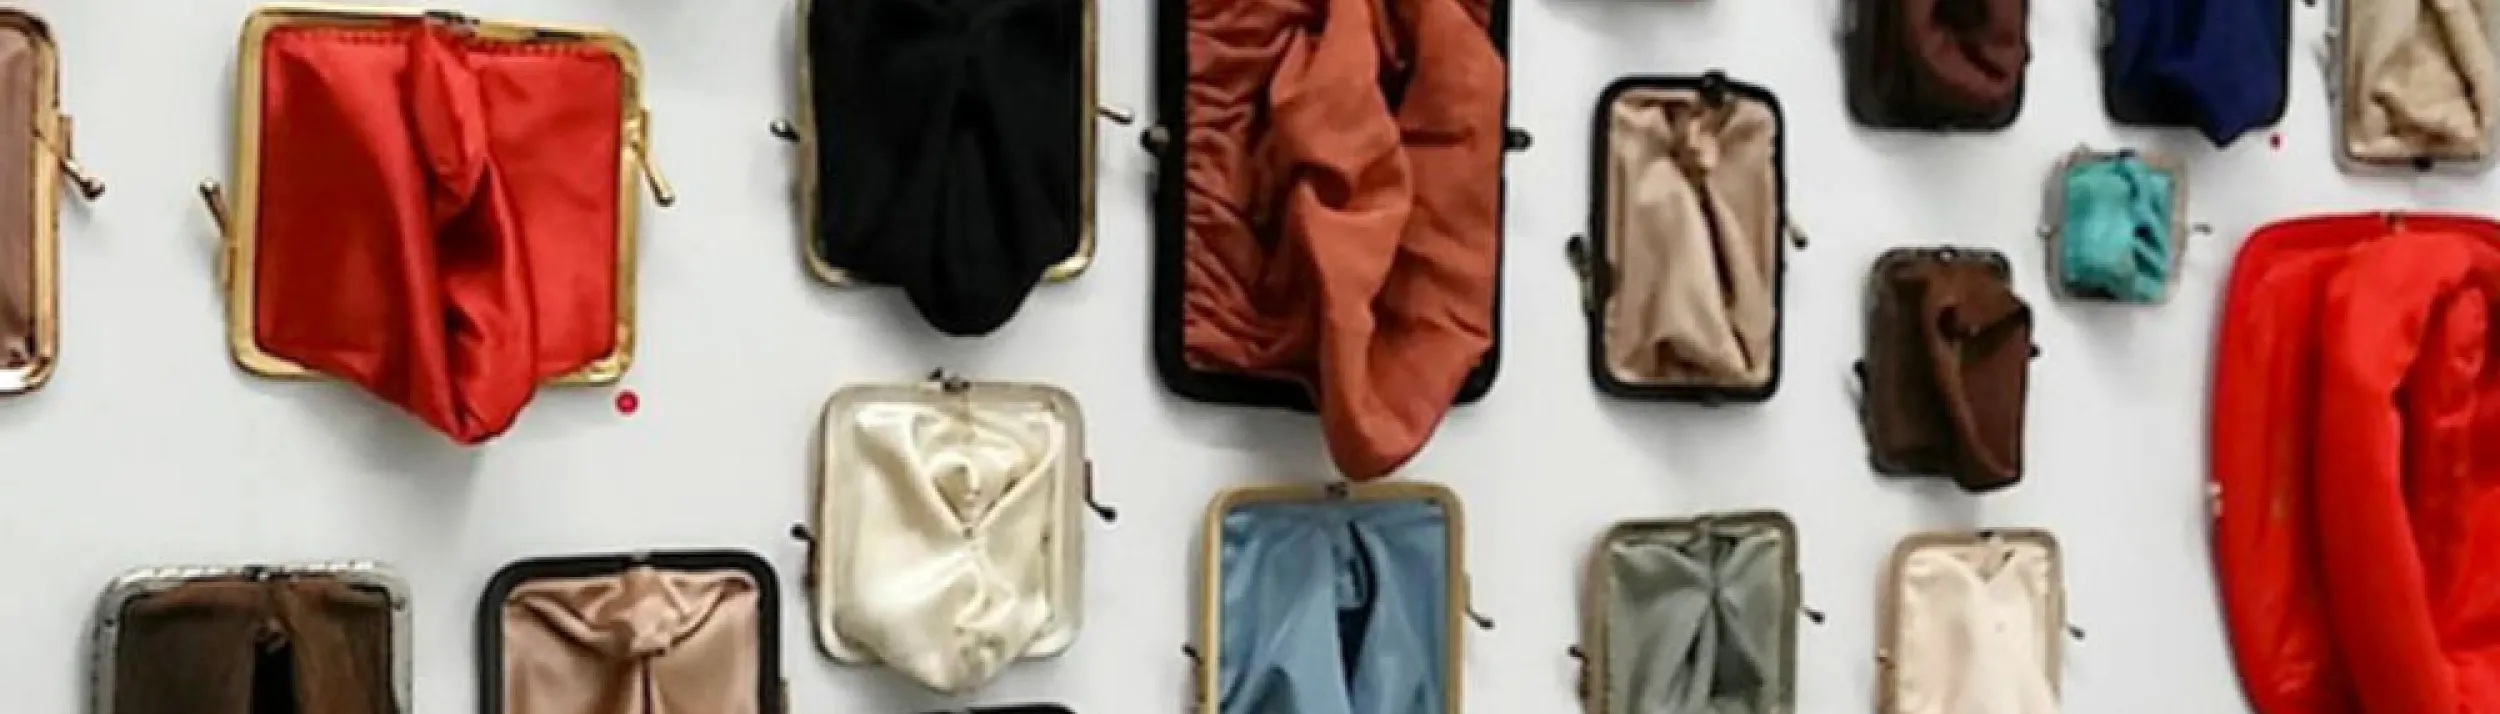 coin purses turned inside out with various sizes and colors representing female genitalia